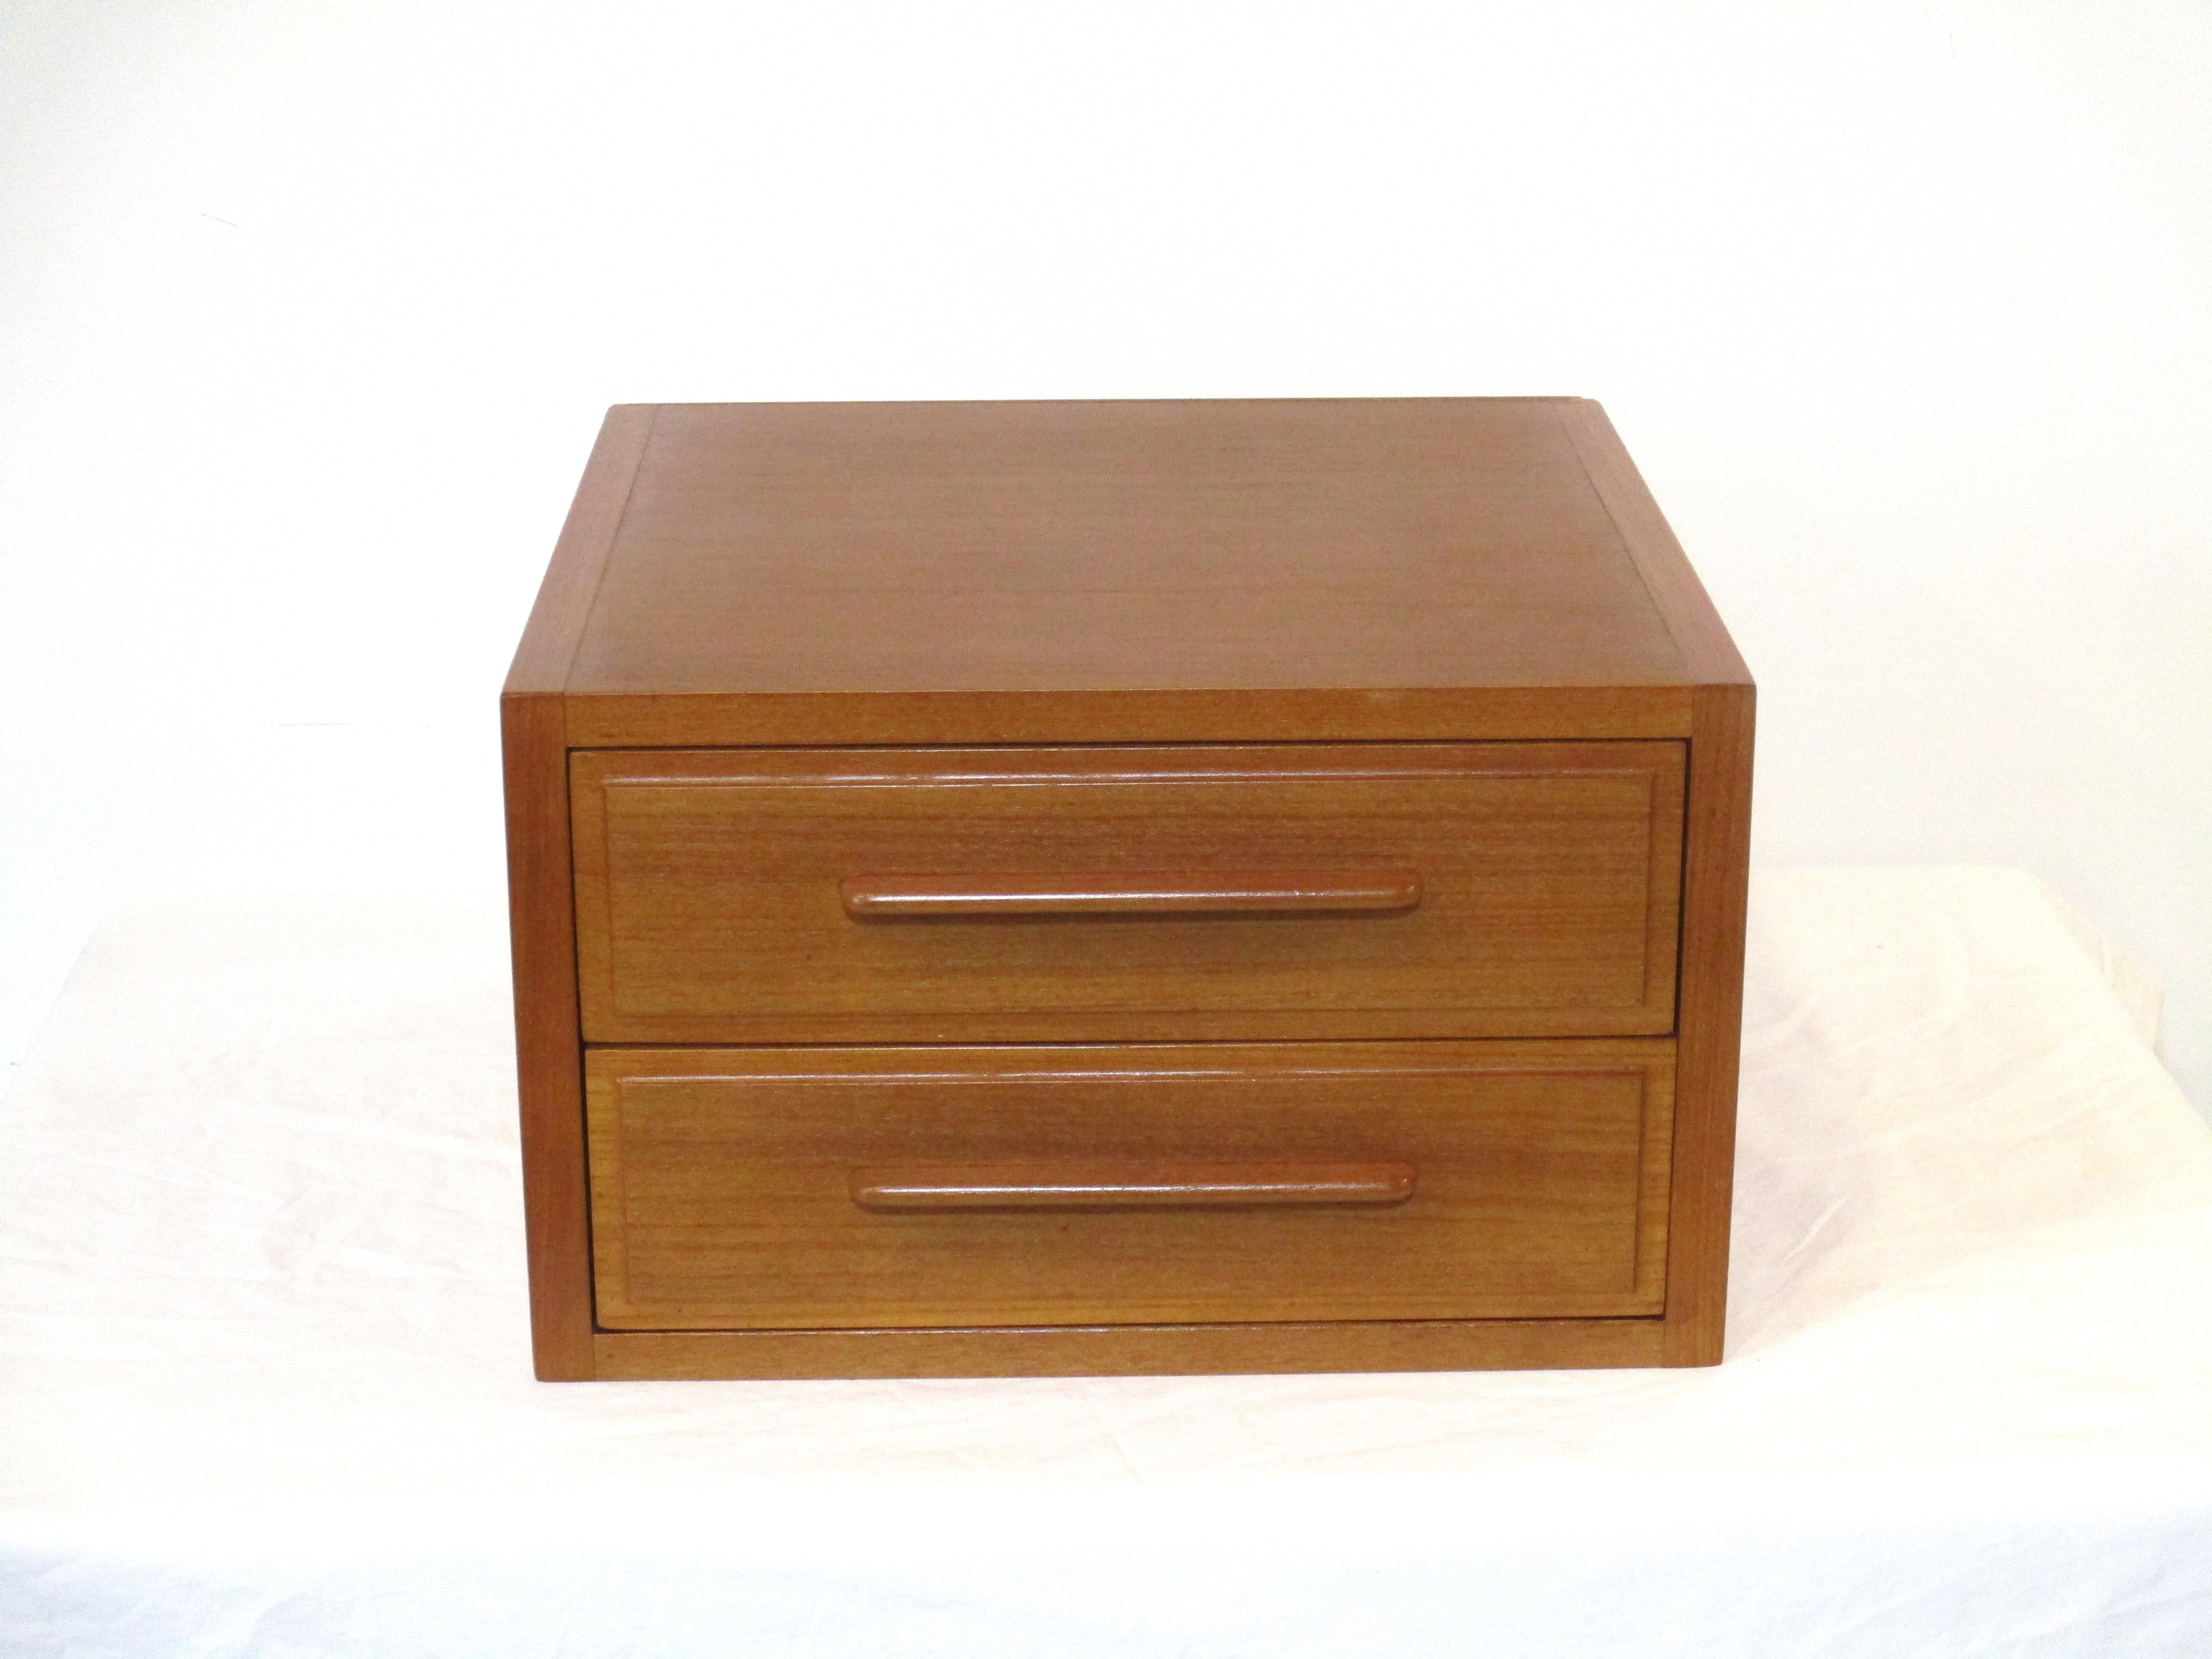 A two drawer dresser top or closet teak wood jewelry / watch box with slender matching pulls. The drawer bottoms are lined in felt to protect your items, a nice size for our everyday jewelry designed and manufactured by H.P. Hansen Mobler Denmark.